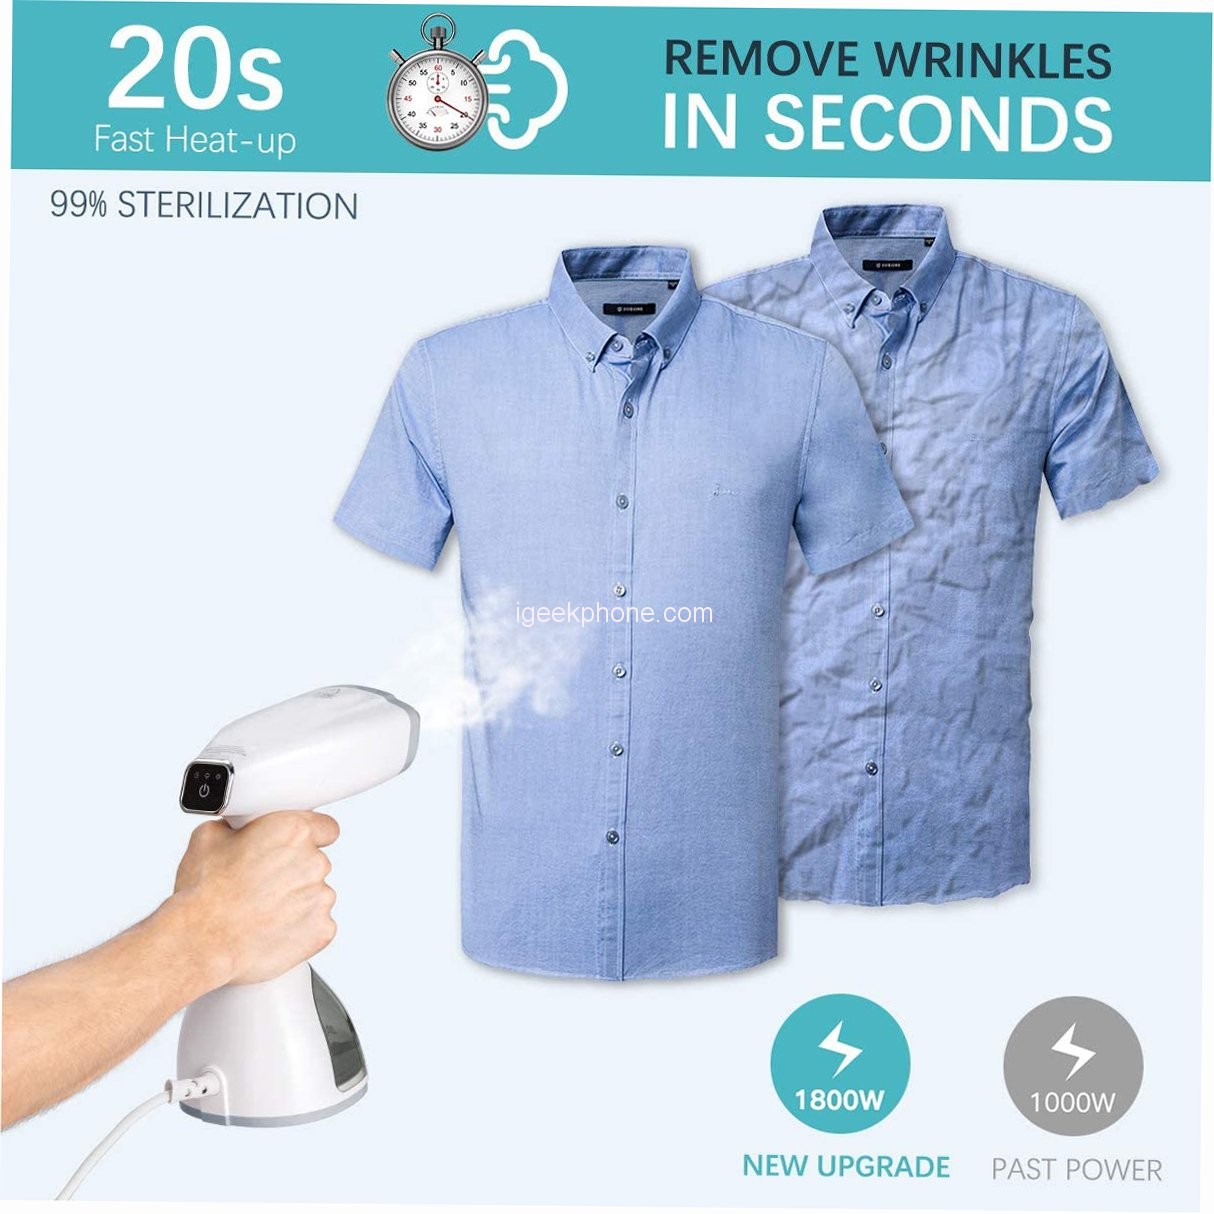 Messtoo LCD Travel Steamer for Clothes With 350ml Big Capacity in $20.99 @Walmart Flash Sale